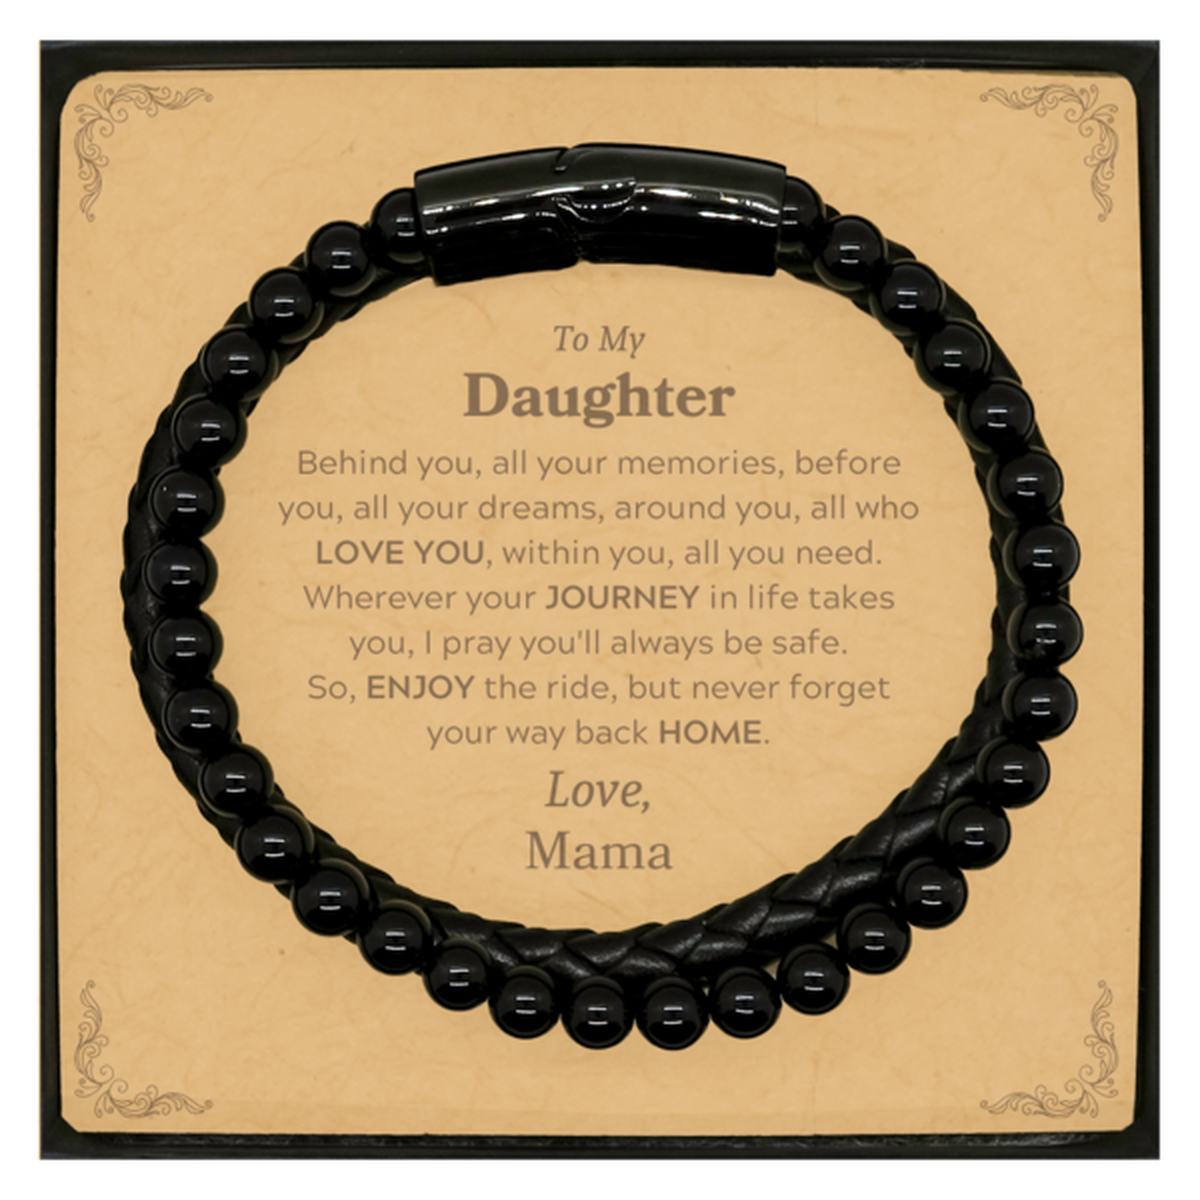 To My Daughter Graduation Gifts from Mama, Daughter Stone Leather Bracelets Christmas Birthday Gifts for Daughter Behind you, all your memories, before you, all your dreams. Love, Mama